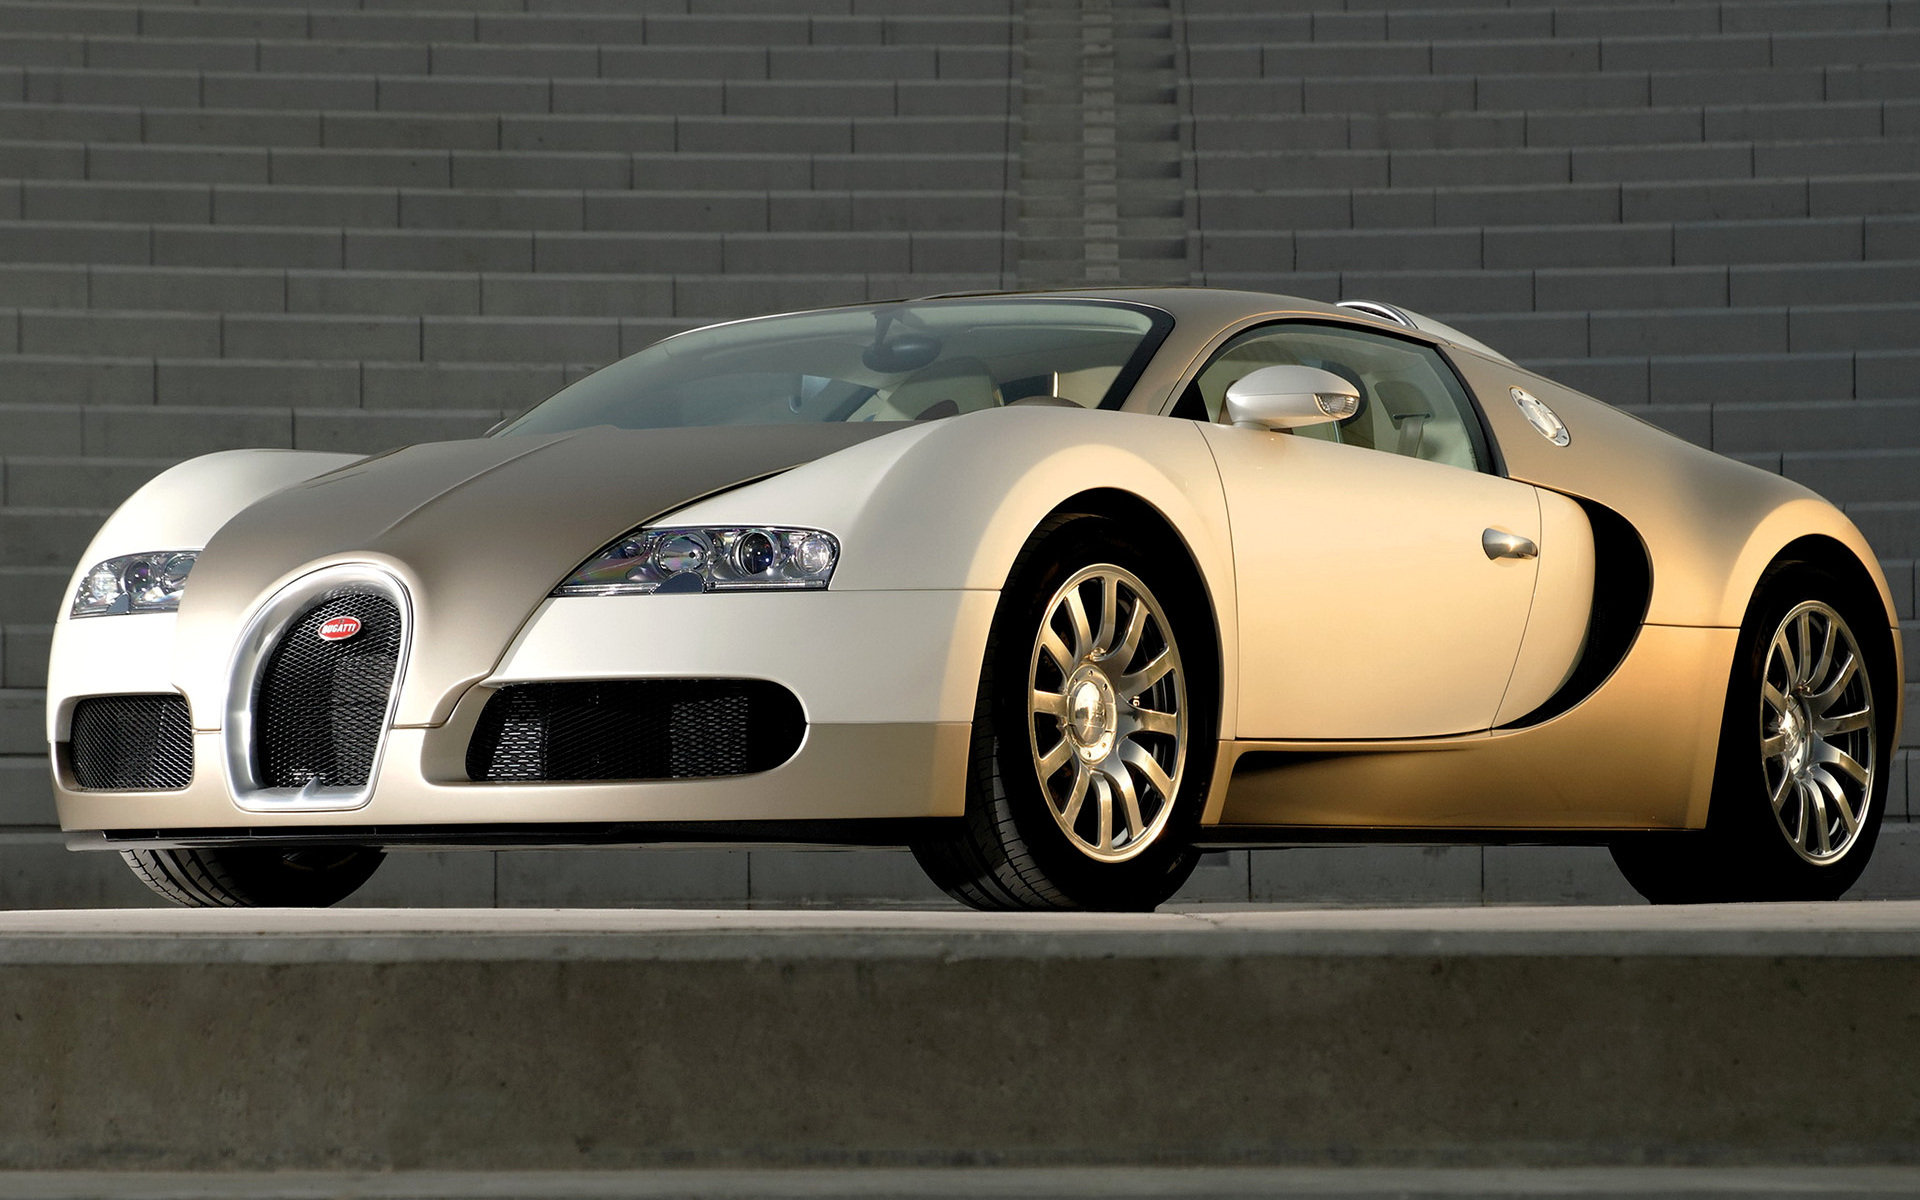 2009 Bugatti Veyron Gold Edition - Wallpapers and HD Images | Car Pixel